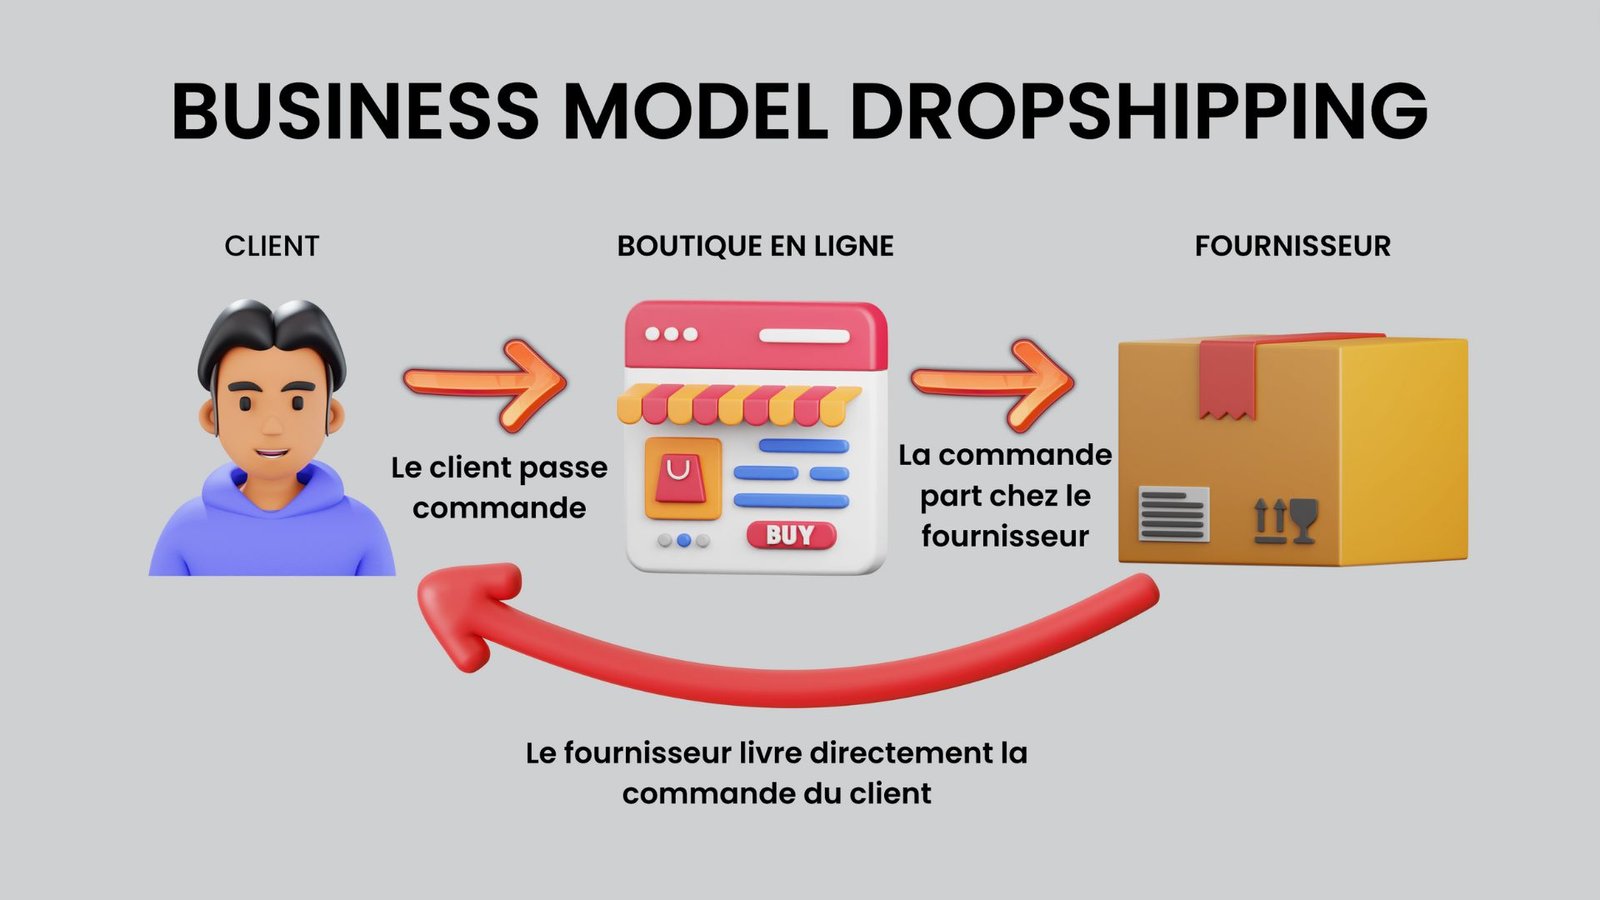 Business model dropshipping